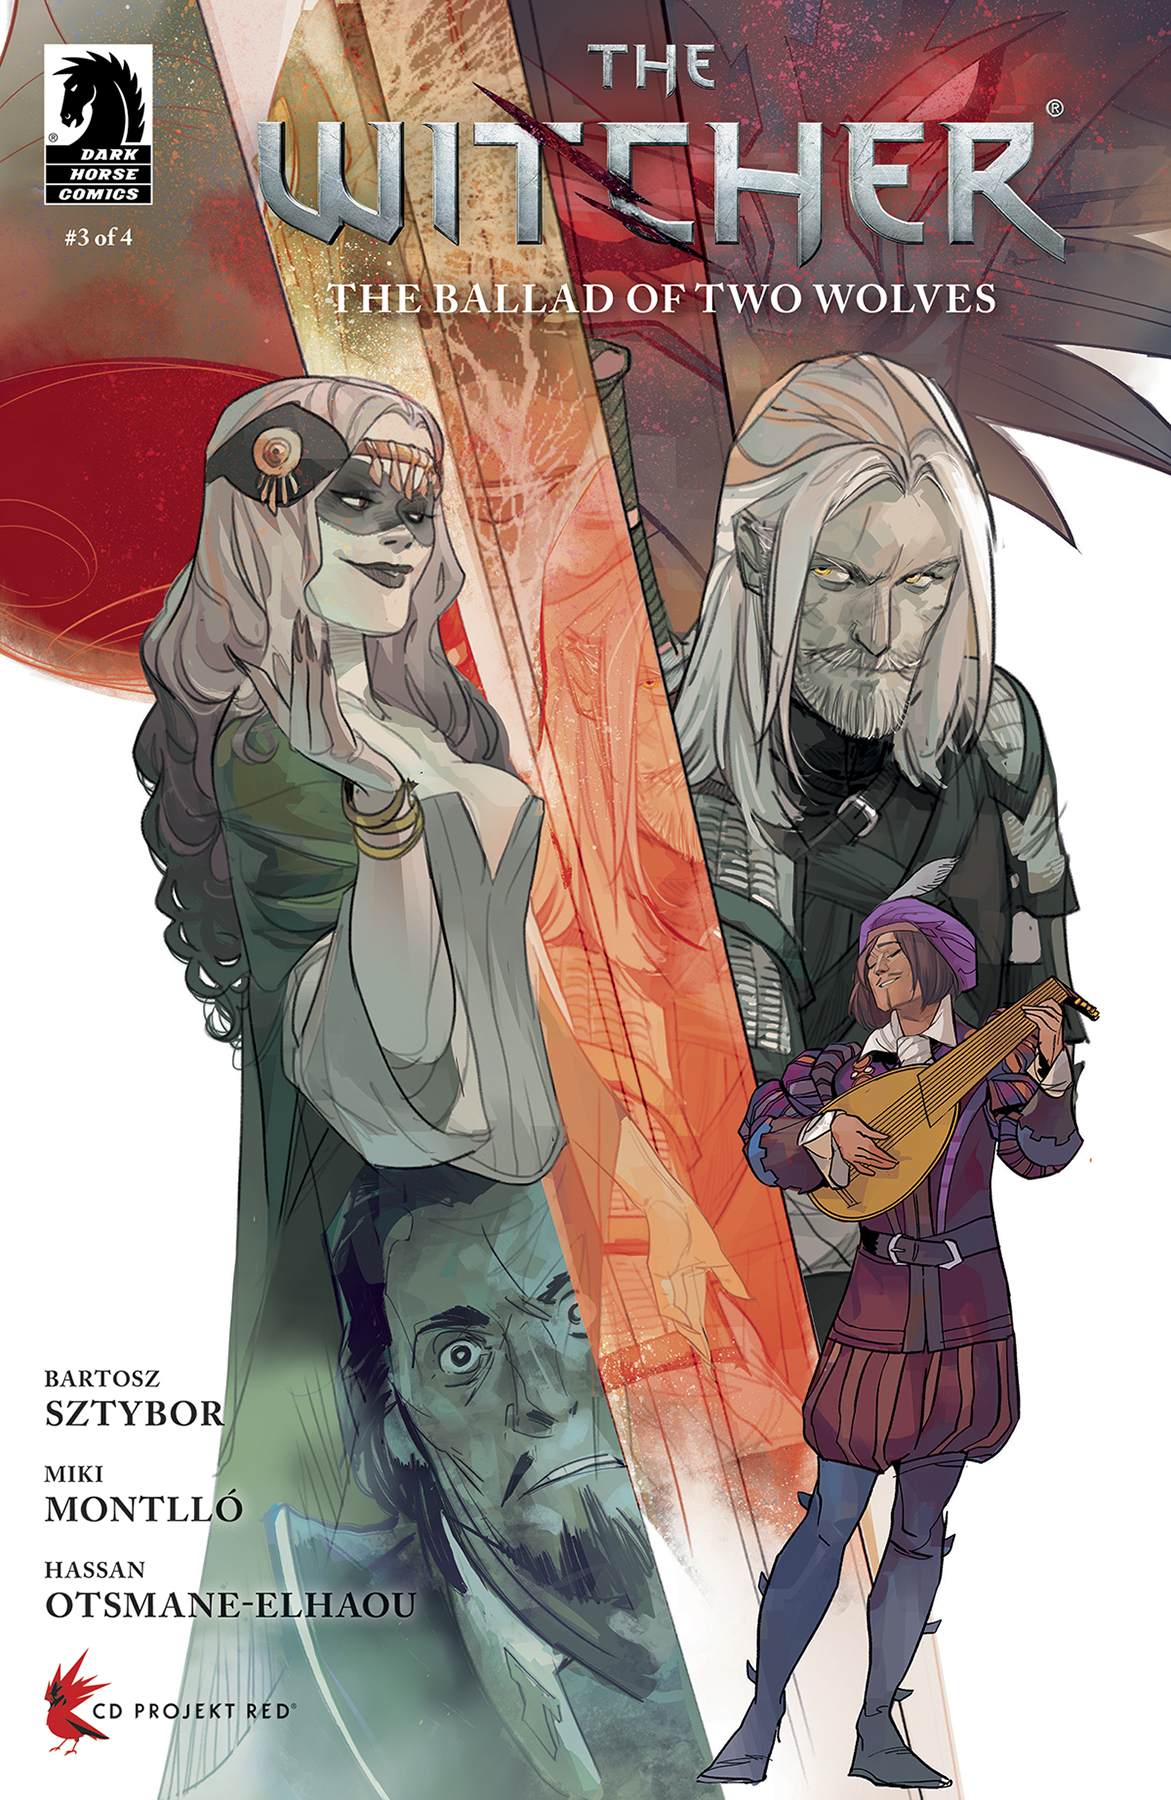 Witcher The Ballad of Two Wolves #3 Cover C Schmidt (Of 4)